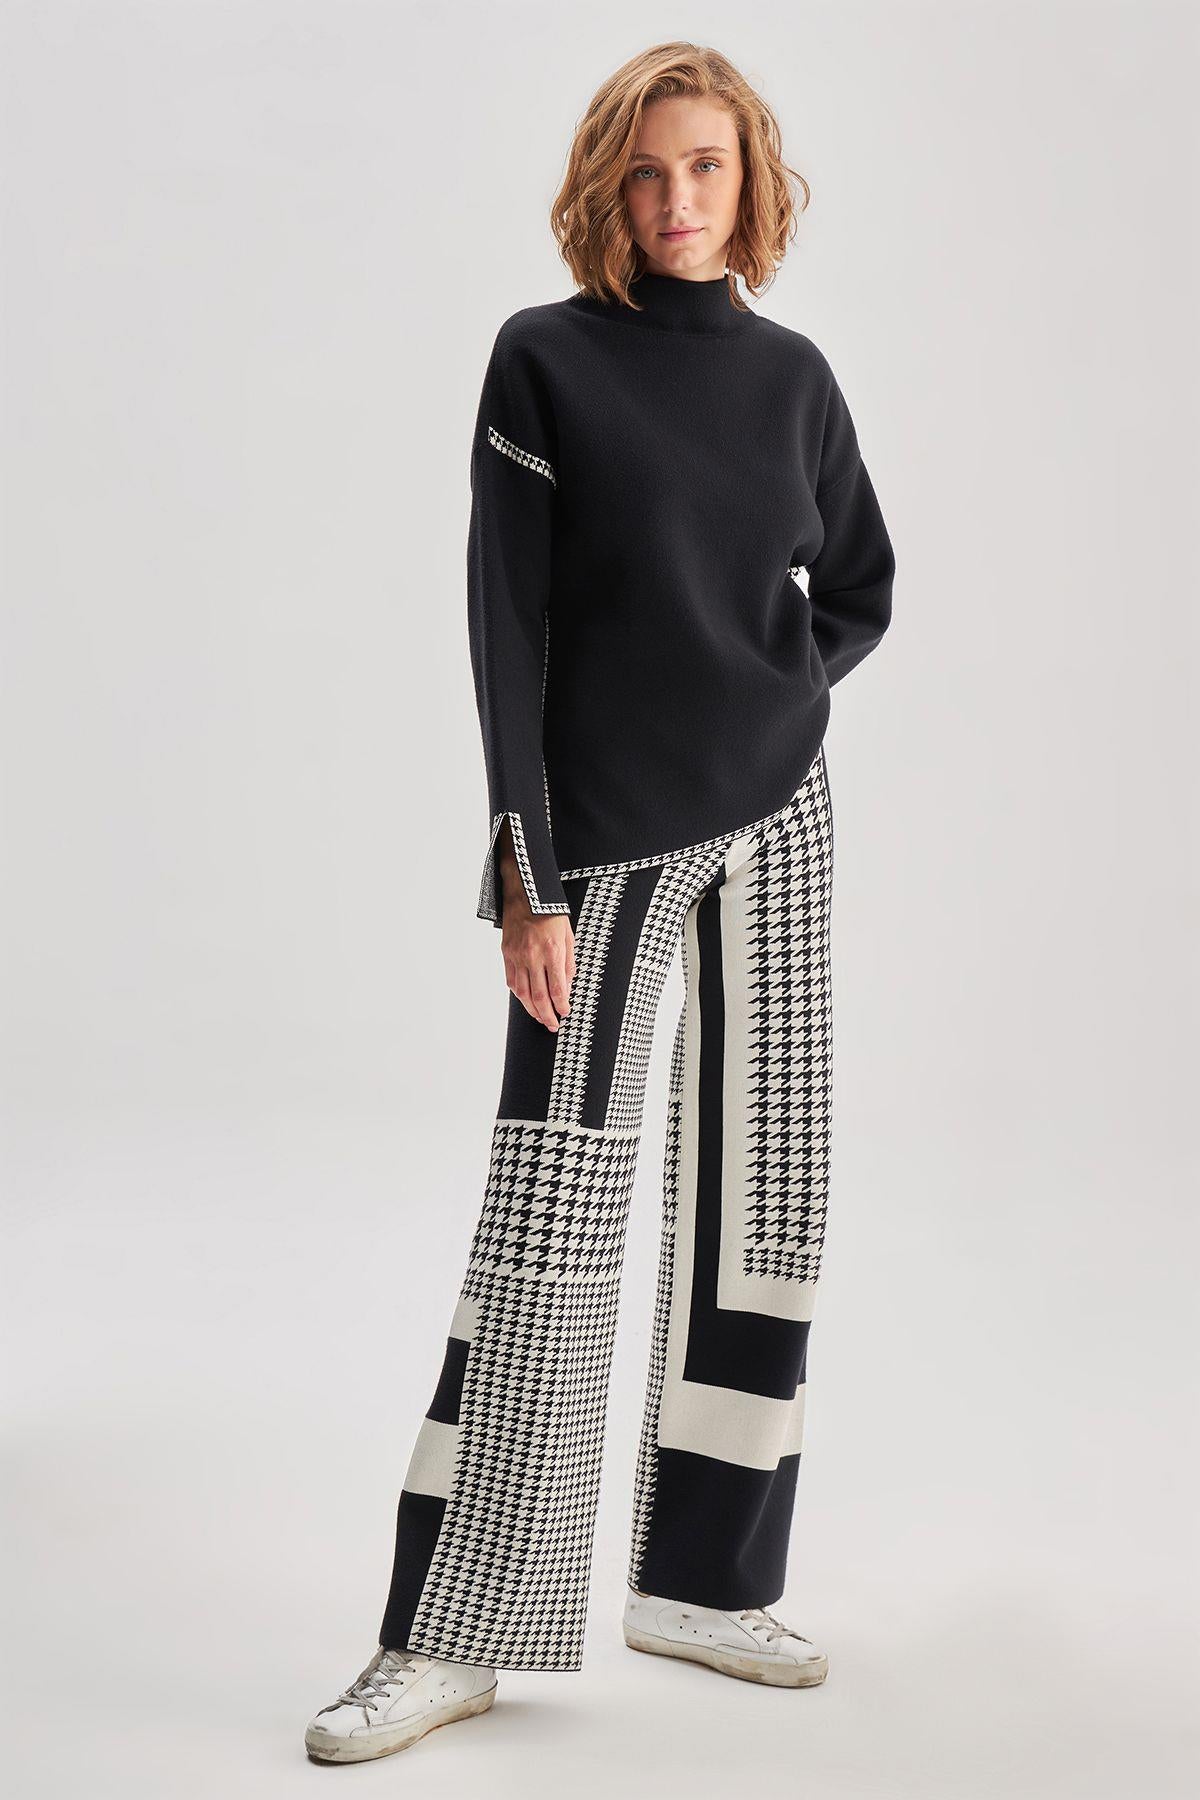 Black and White Patterned Knitwear Trousers